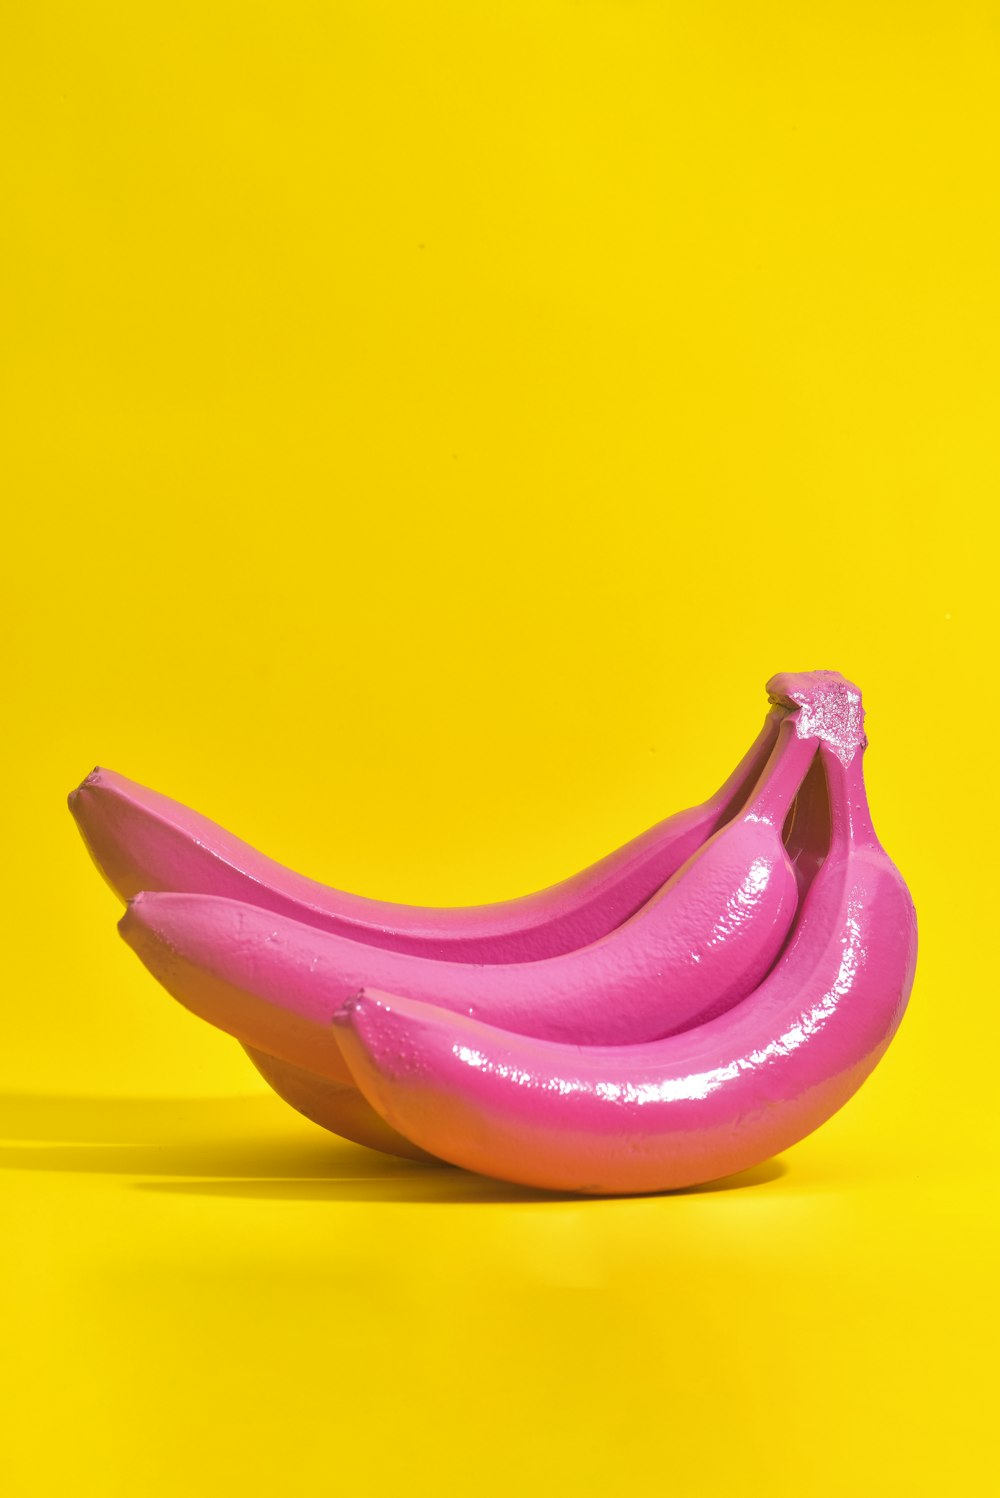 a pink banana sitting on top of a yellow background